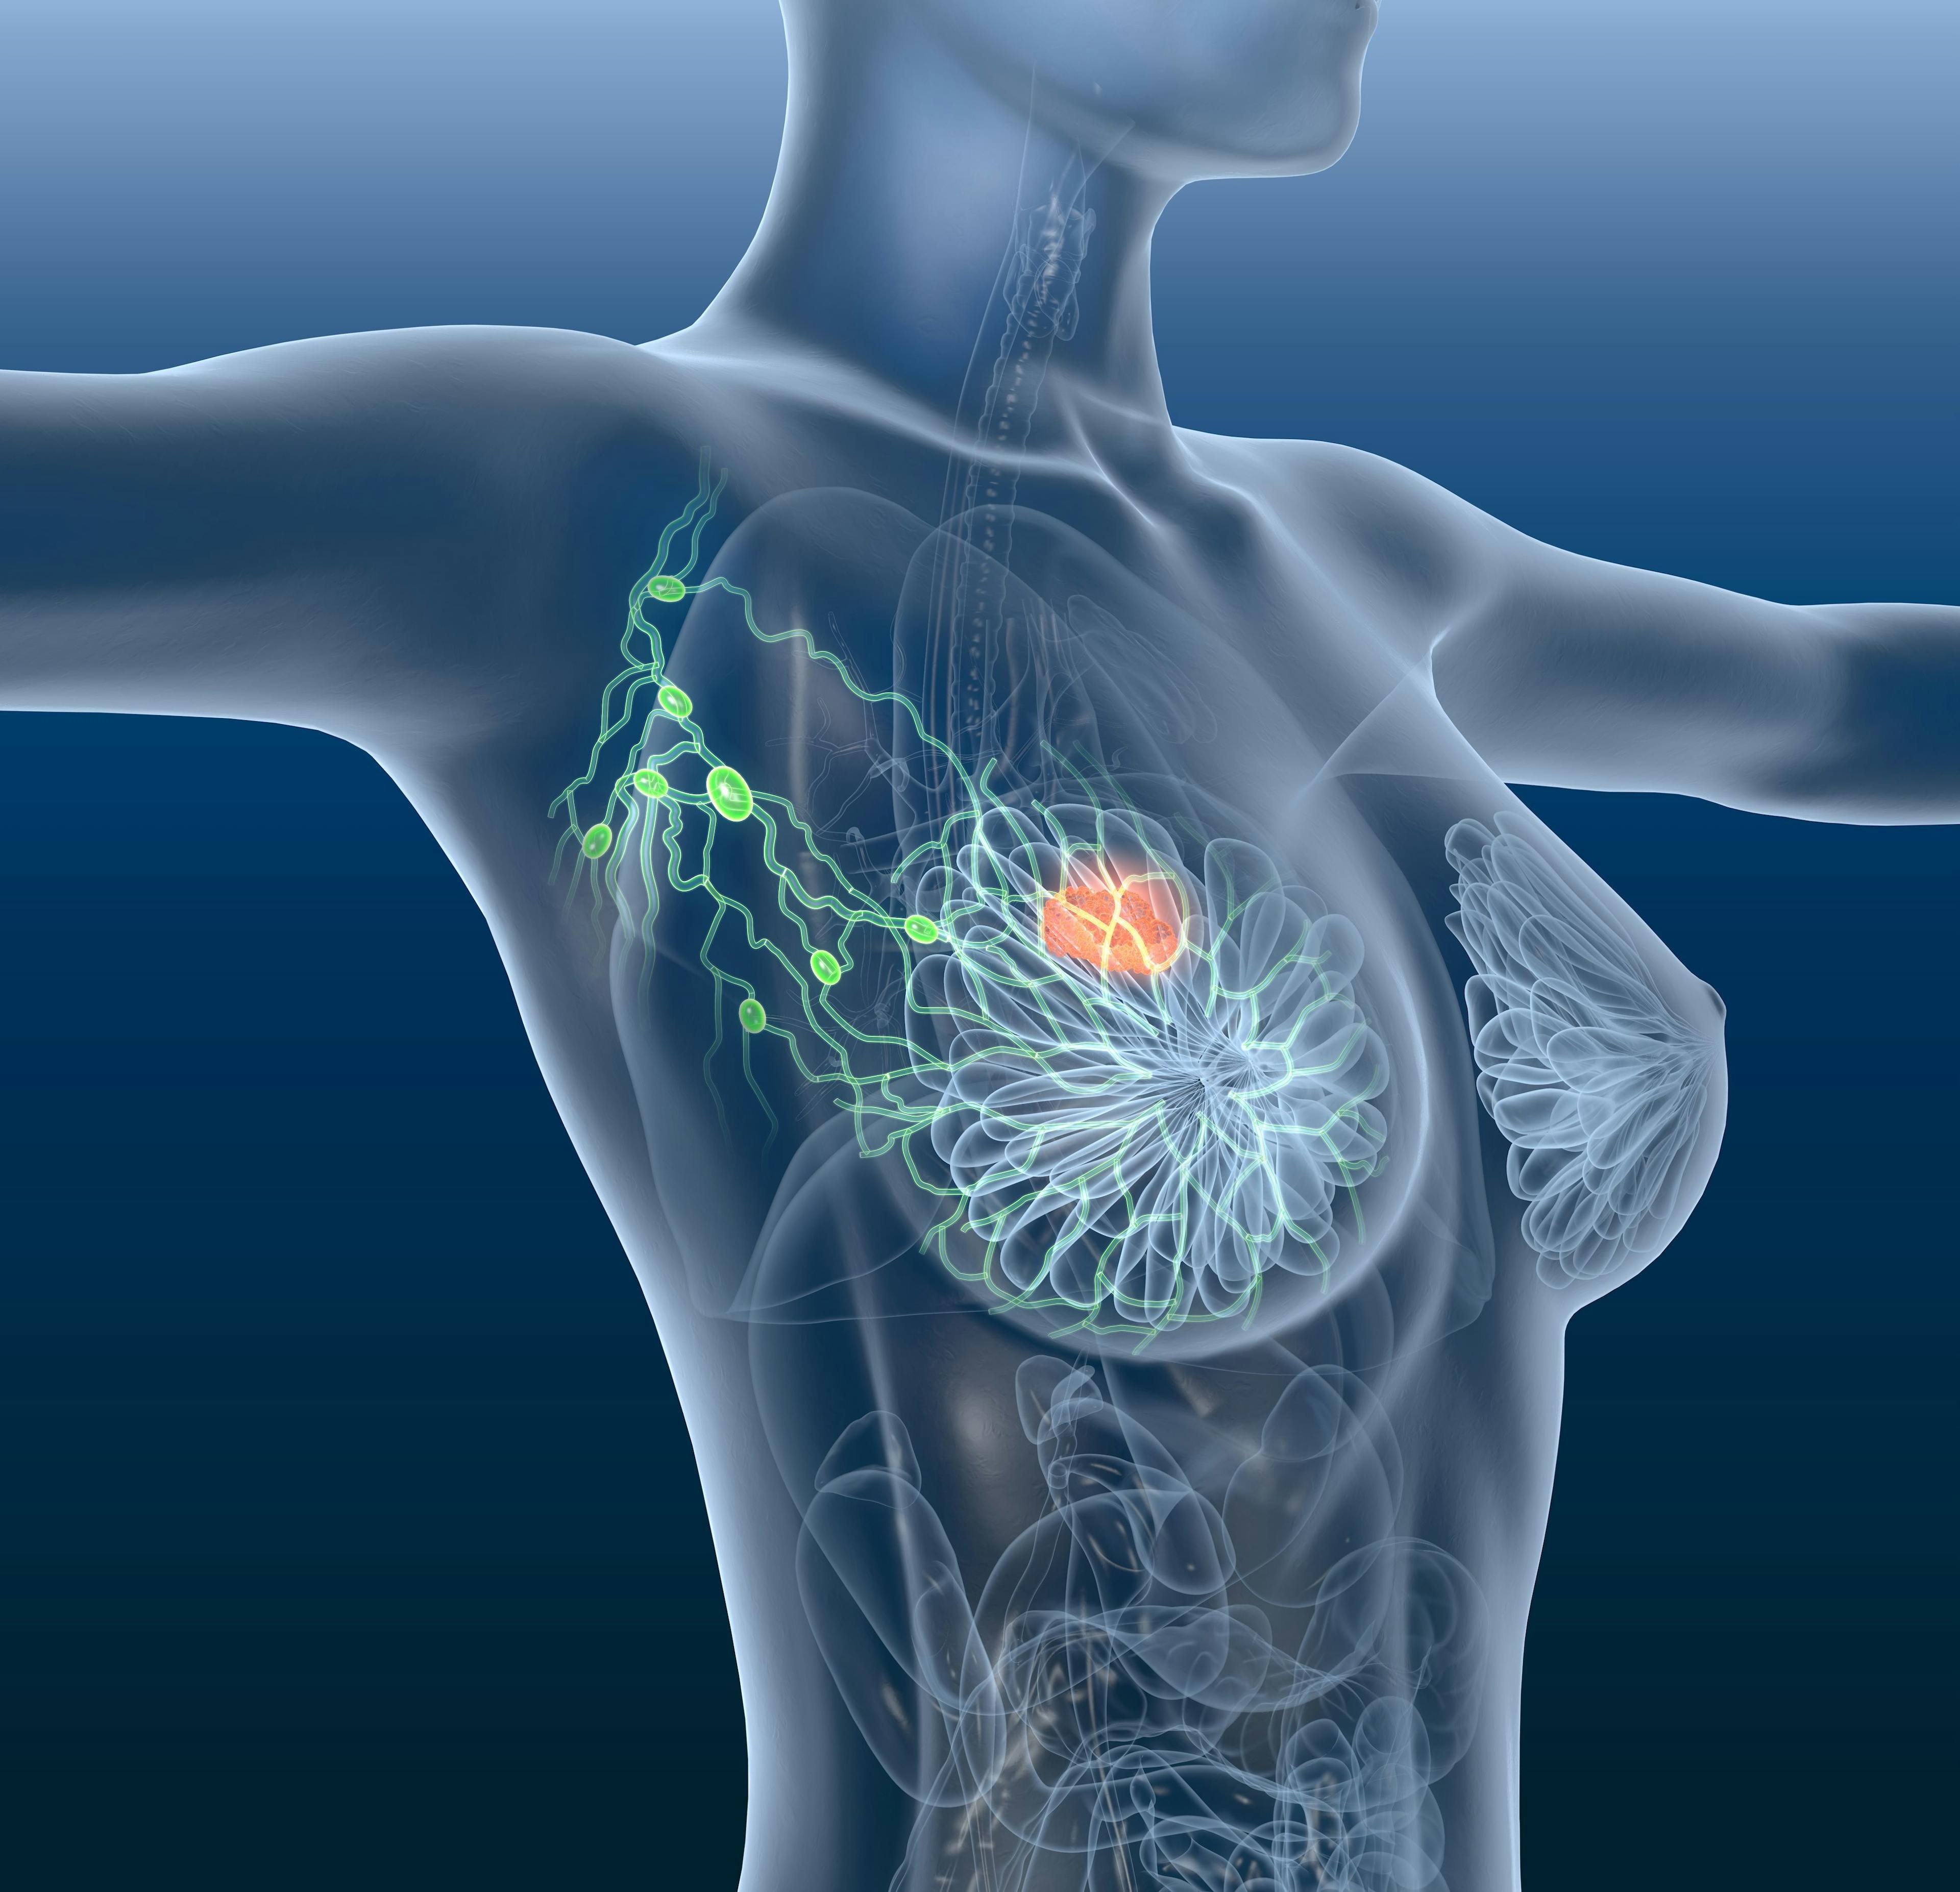 Enhertu Outperforms Chemotherapy in HER2-Low Unresectable/Metastatic Breast Cancer